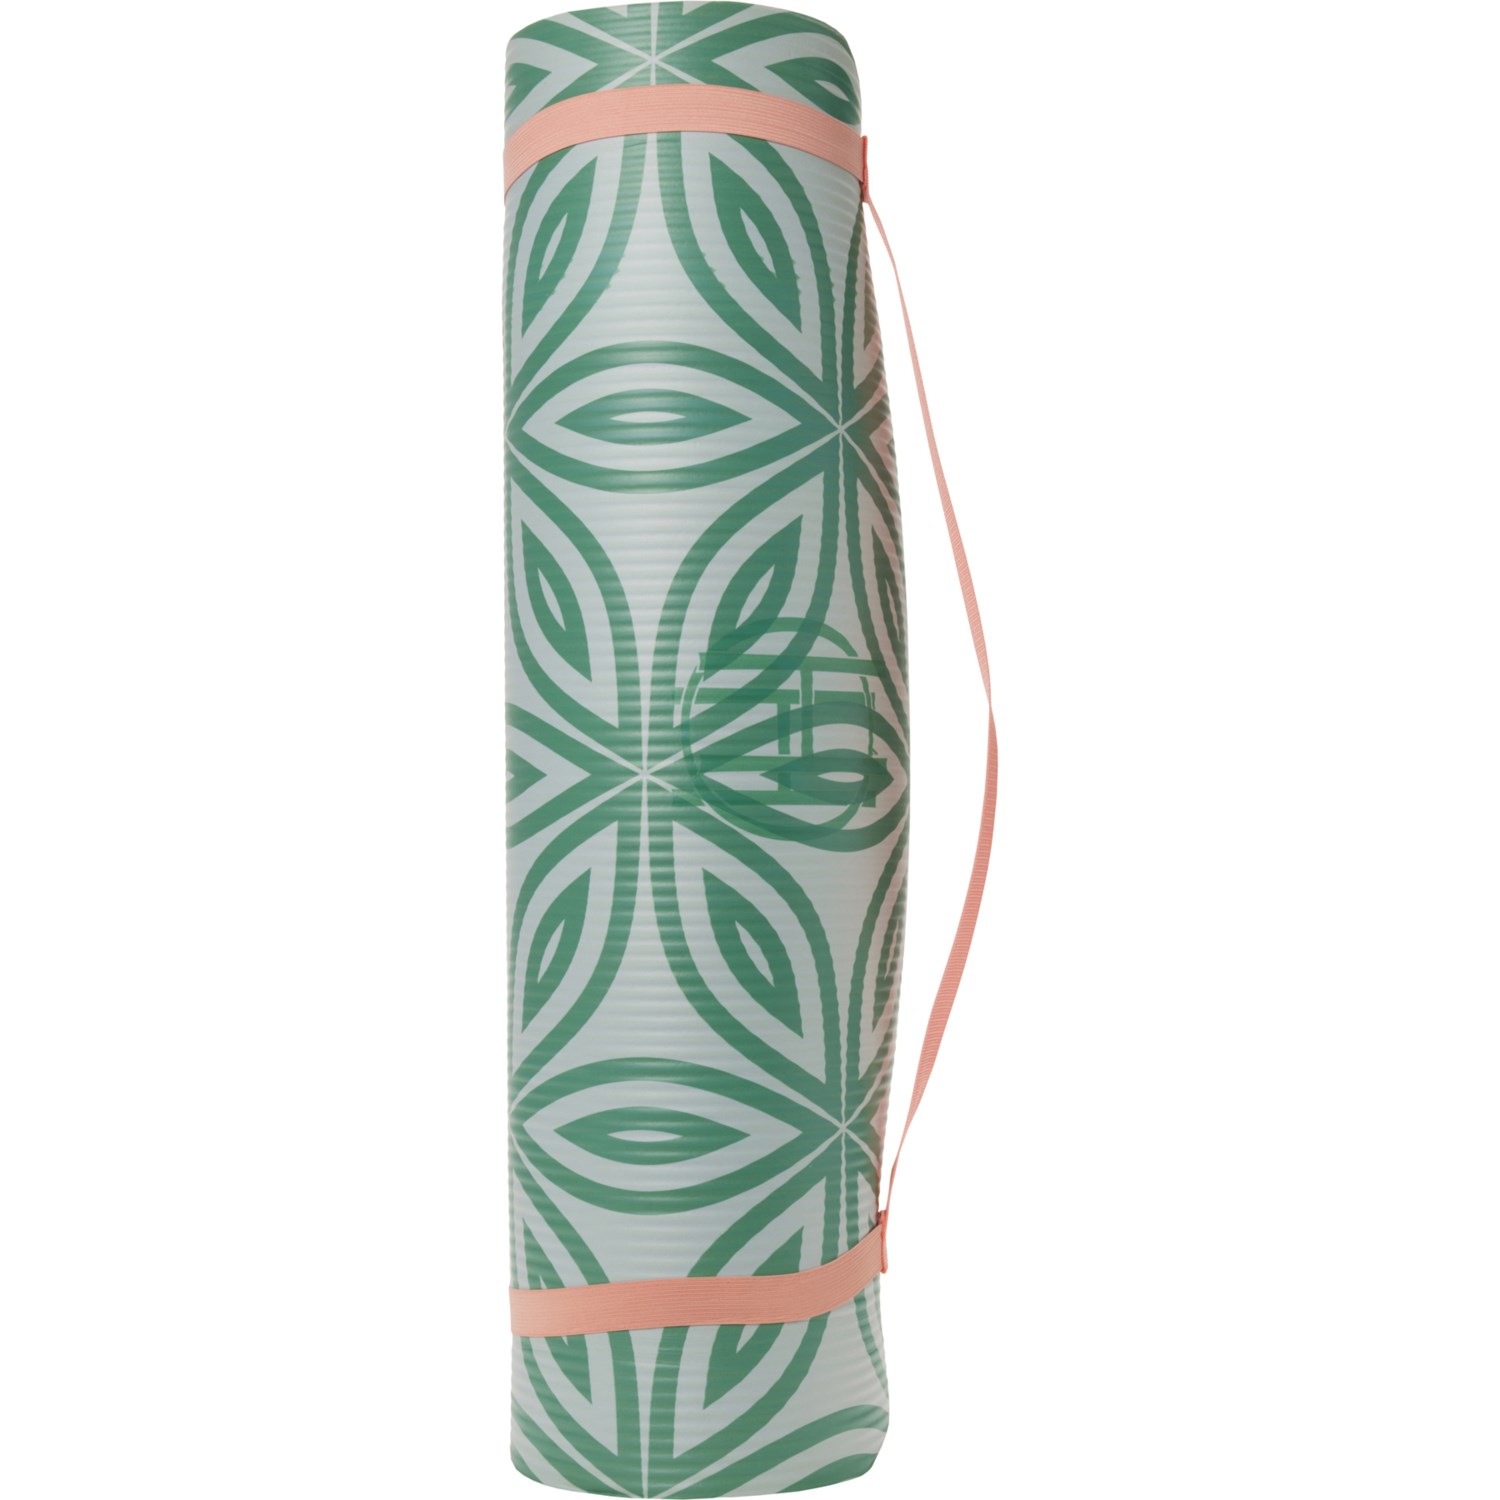 House of Harlow 1960 Pro Fitness Printed Yoga Mat - 68x24”, 10 mm - Save 31%